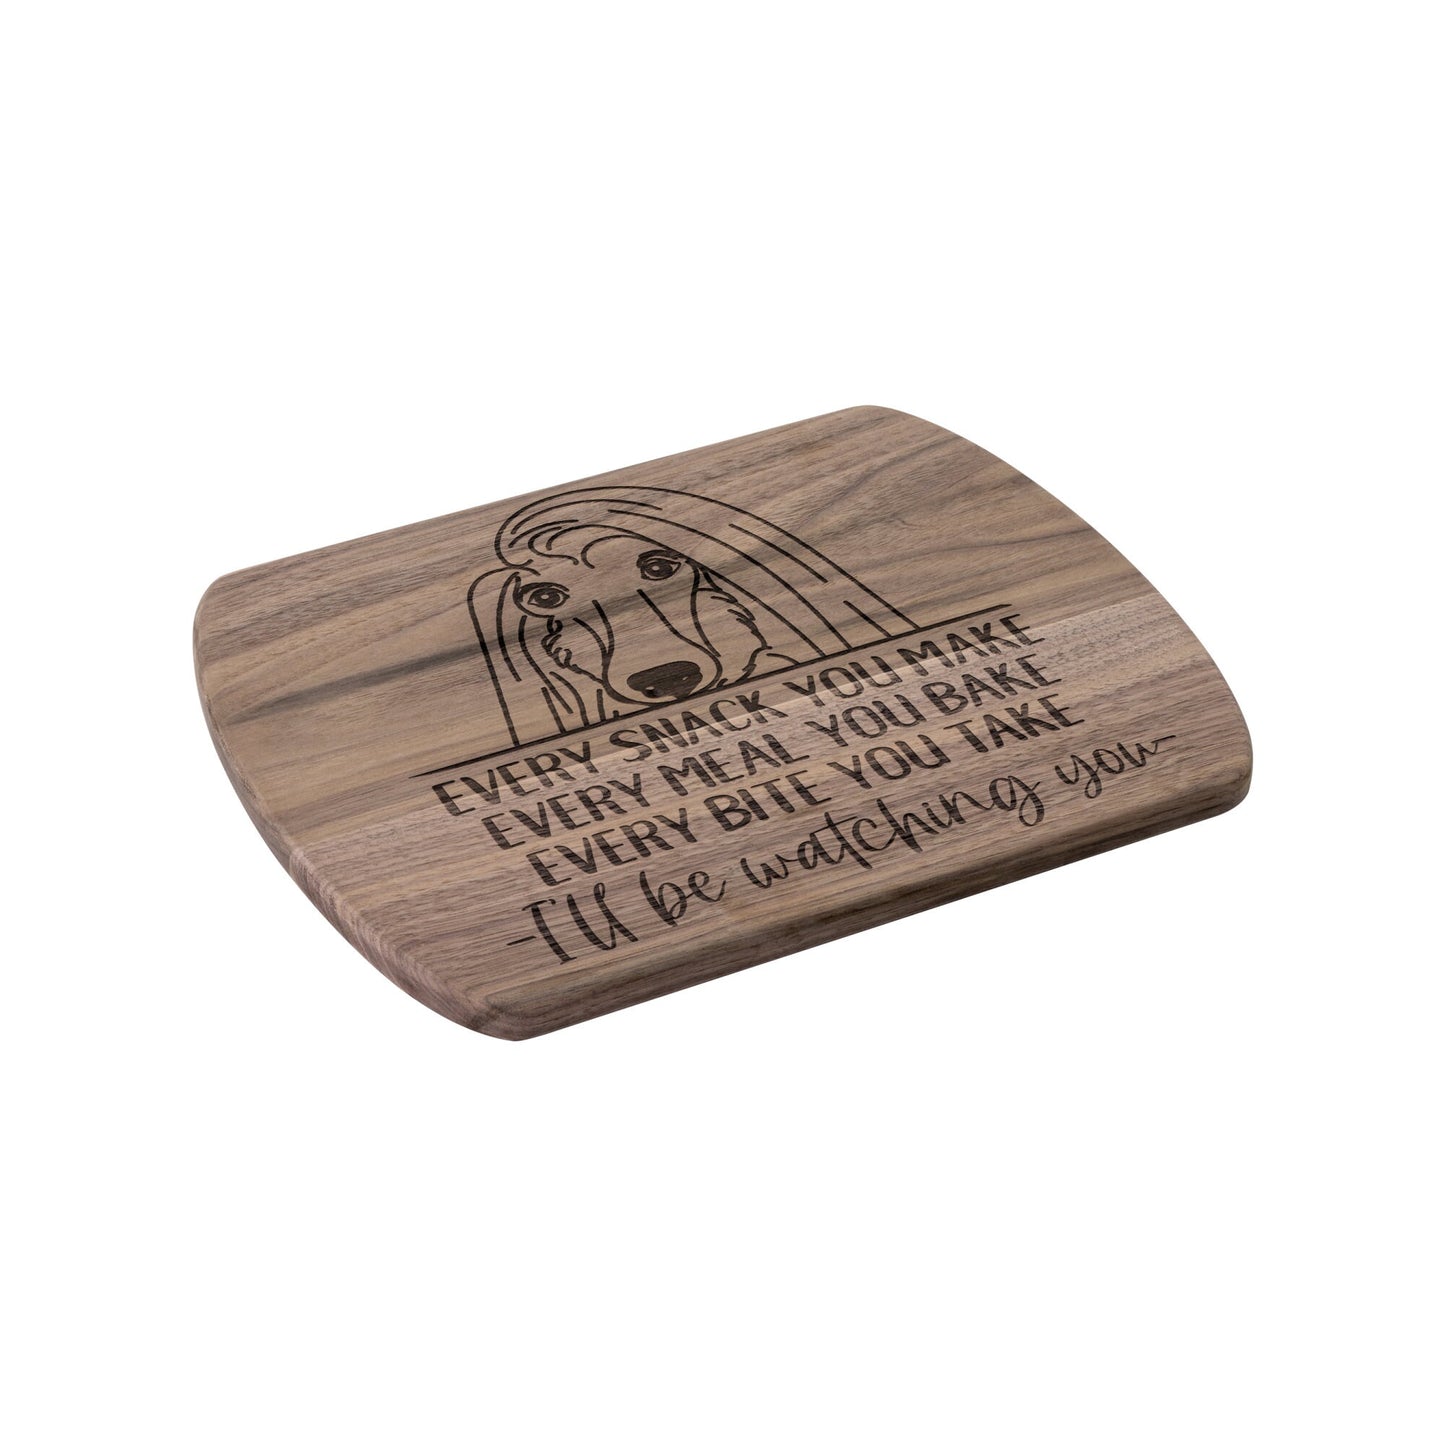 Afghan Hound Snack Funny Cutting Board for Dog Mom, Dog Lover Wood Serving Board, Charcuterie Board, Wooden Chopping Board Gifts for Him